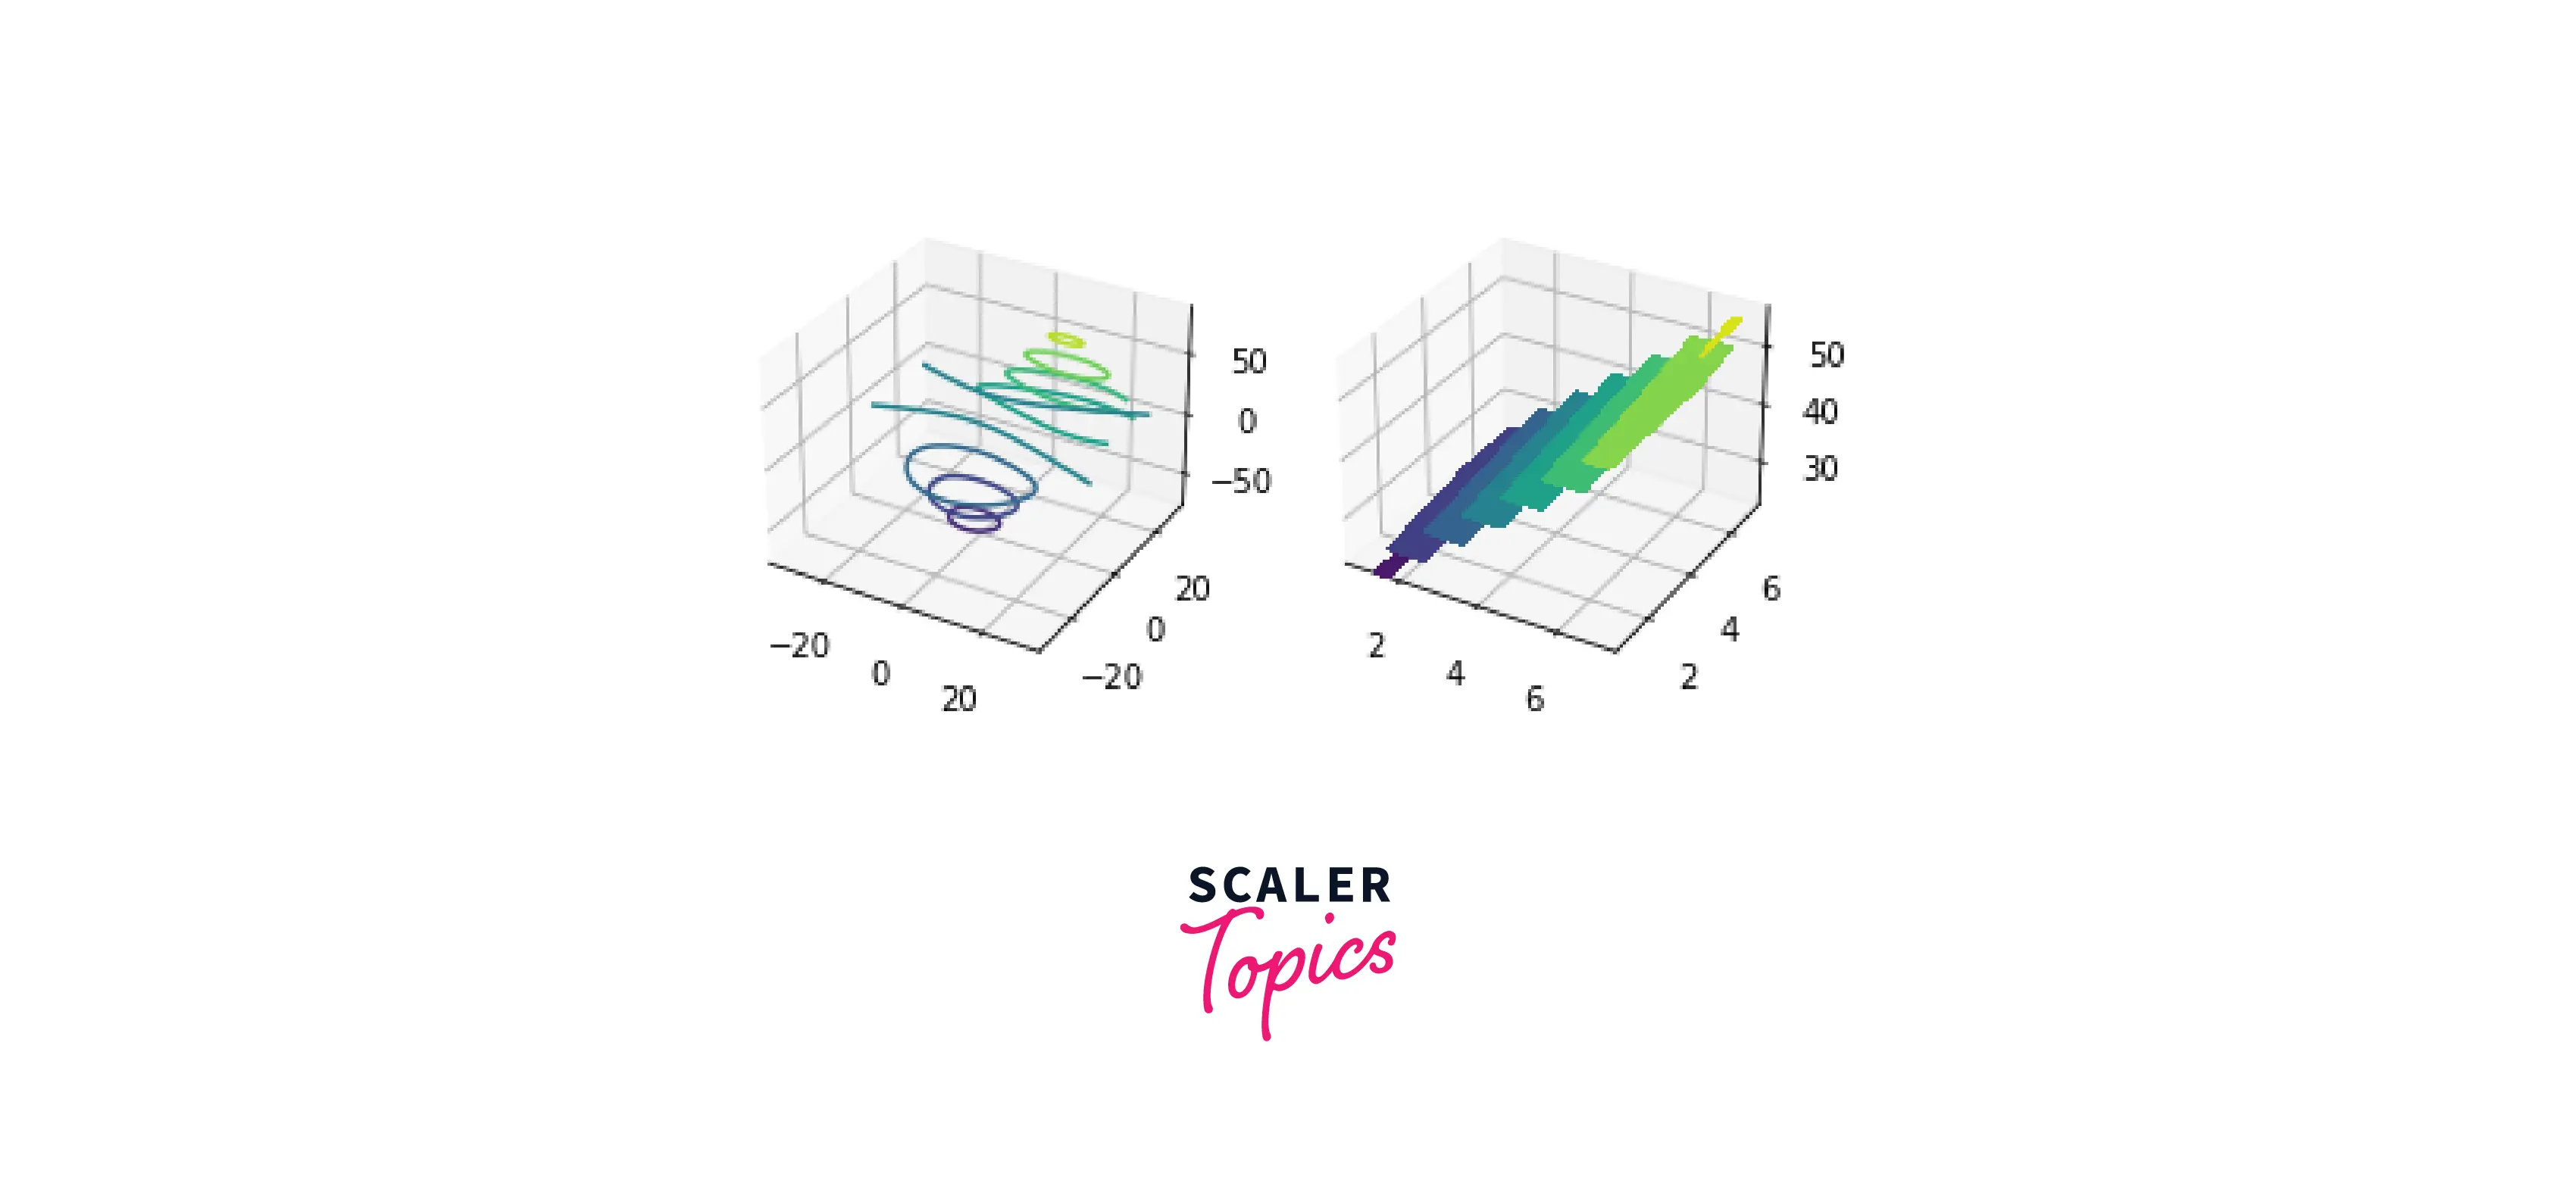 Introduction To D Figures In Matplotlib Scaler Topics 37948 Hot Sex Picture 0382